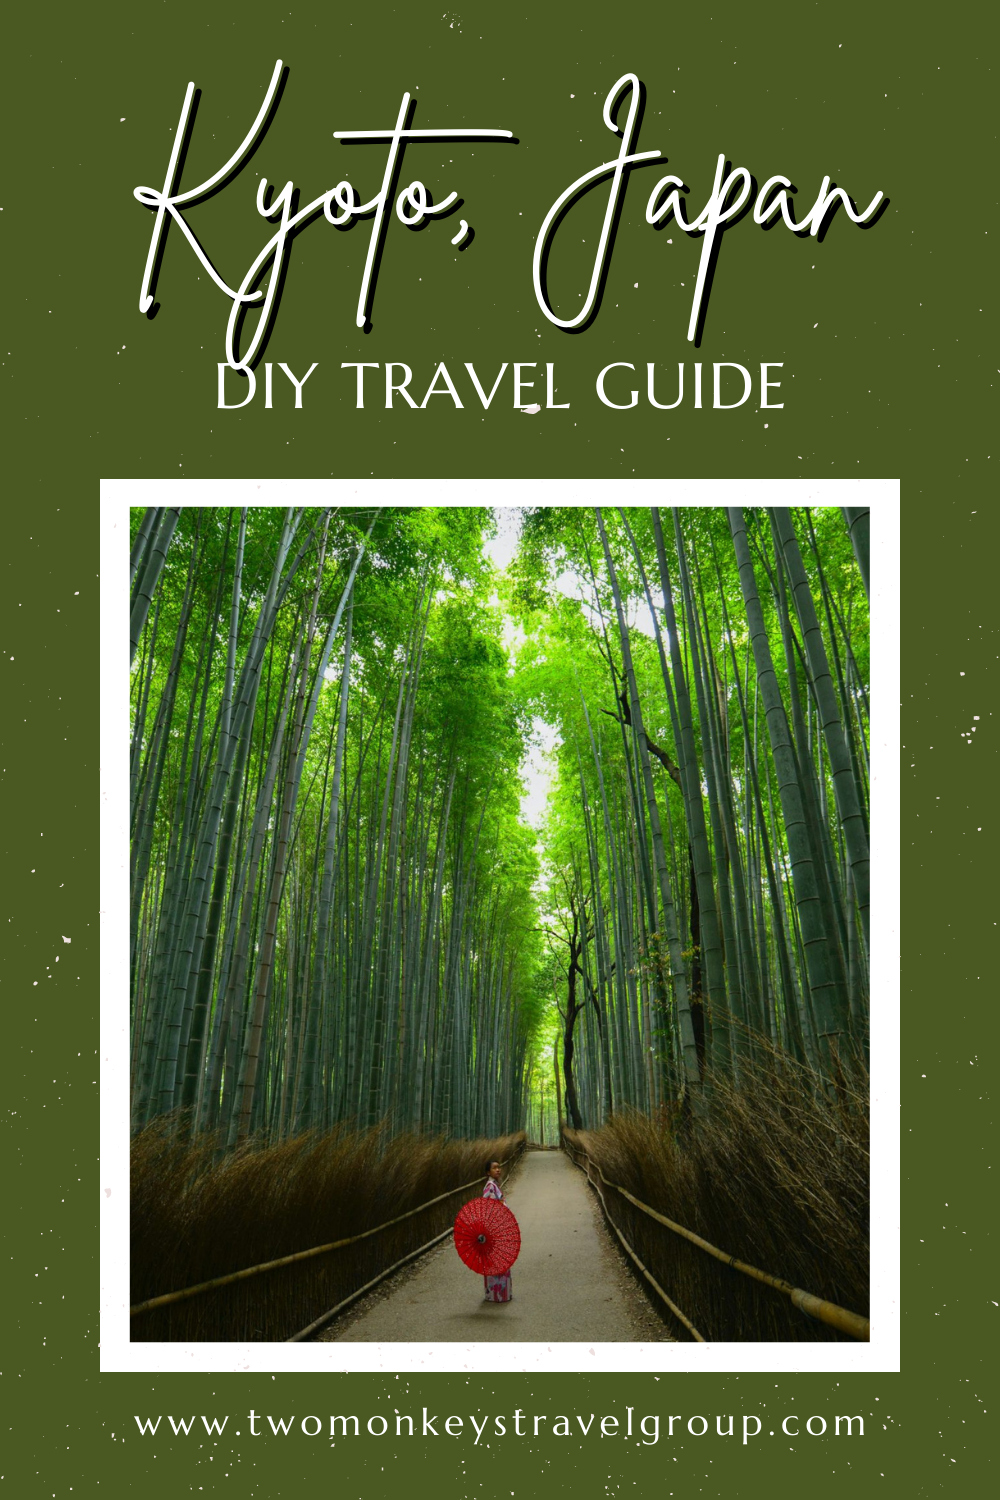 DIY Travel Guide to Kyoto, Japan [With Suggested Tours]